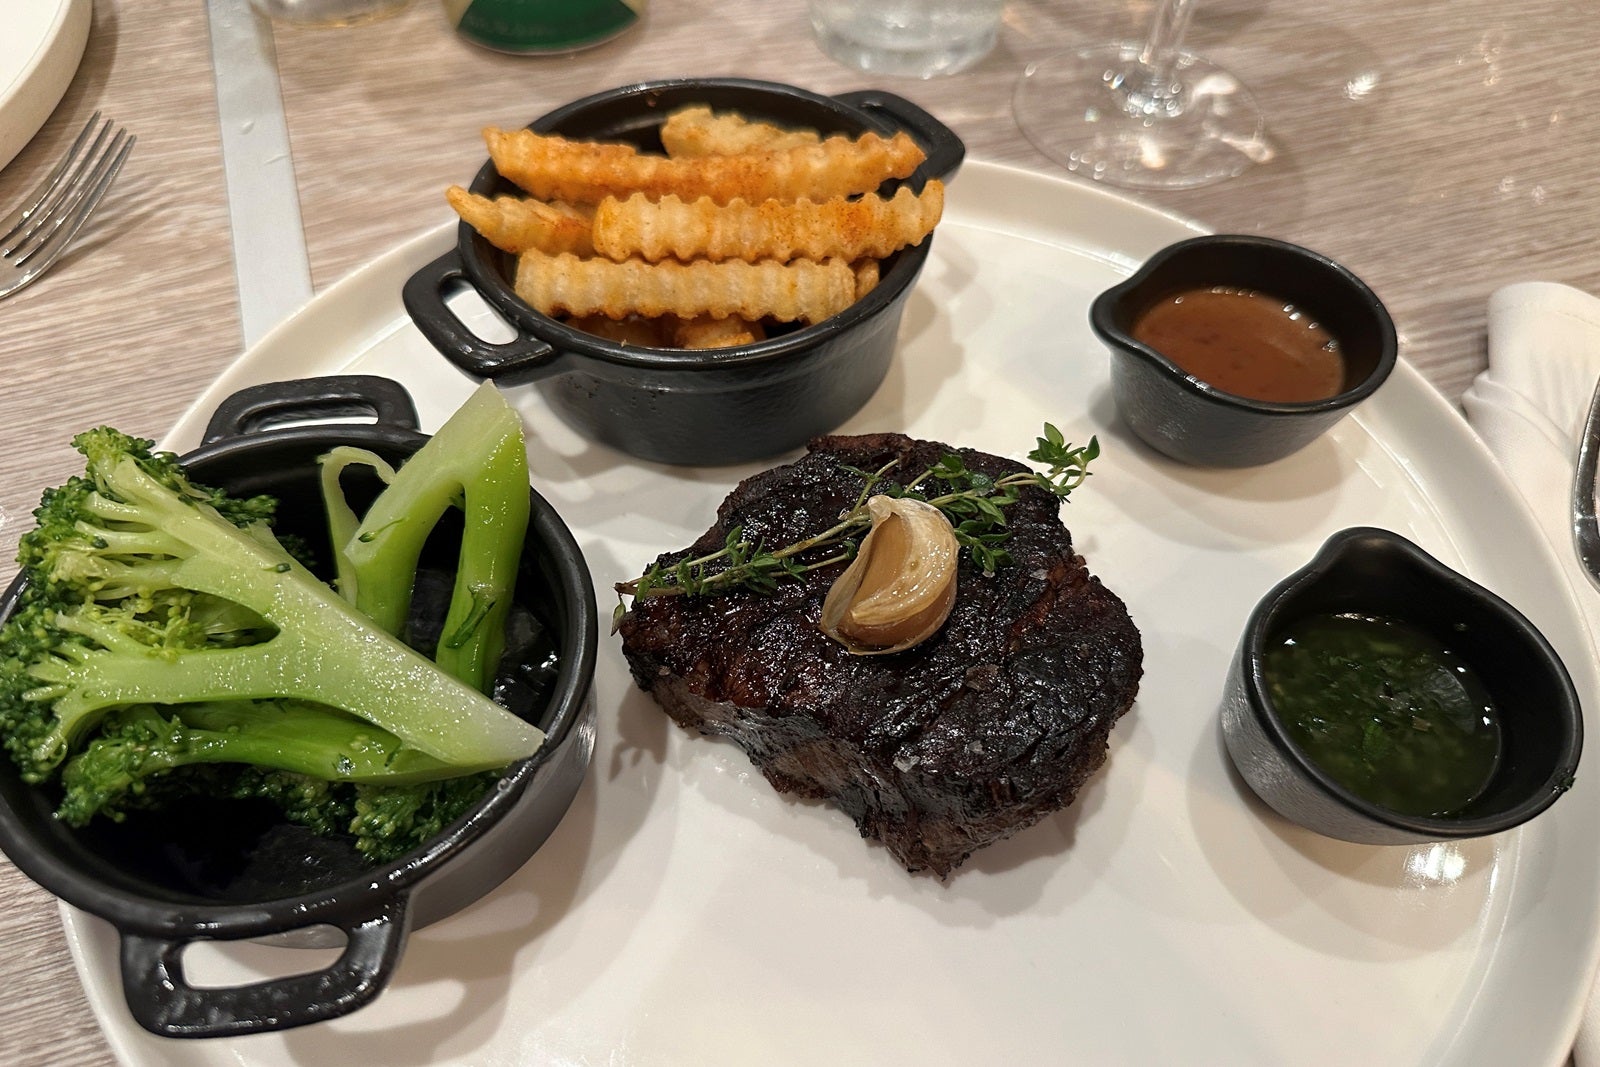 Filet mignon on a white plate surrounded by sides of crinkle-cut fries and broccoli with dipping sauces